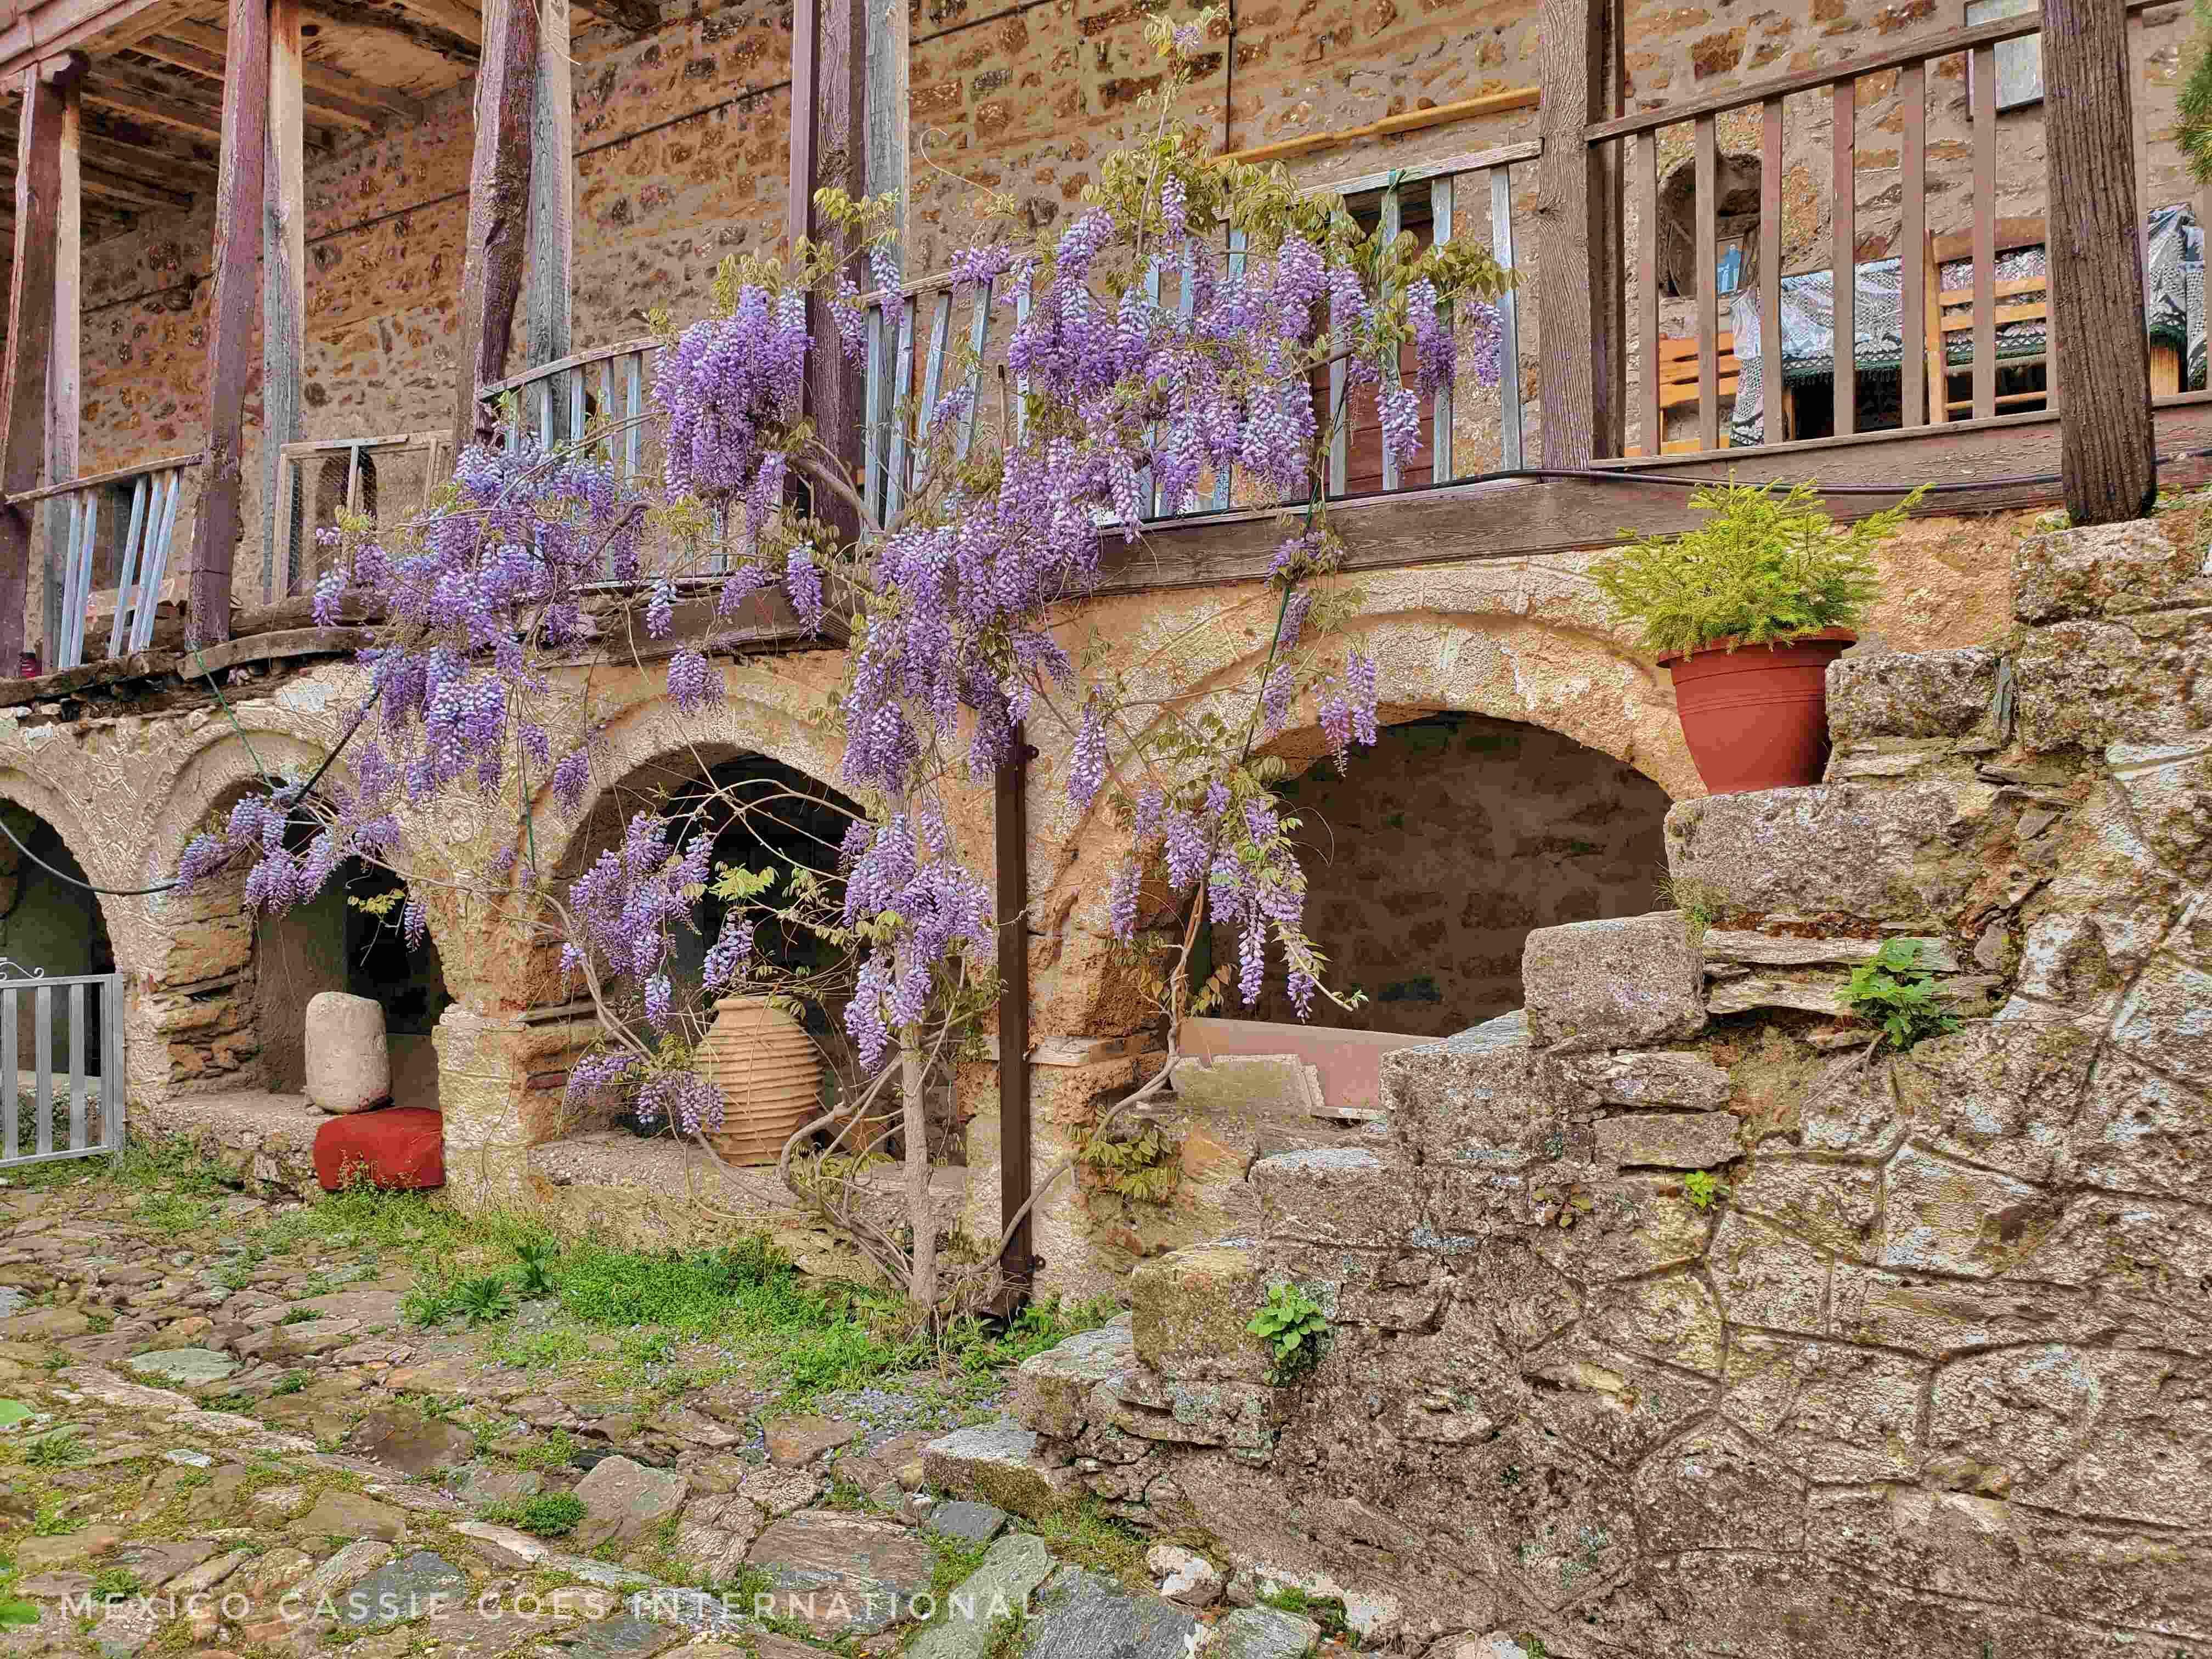 building with wisteria hanging over three small arches